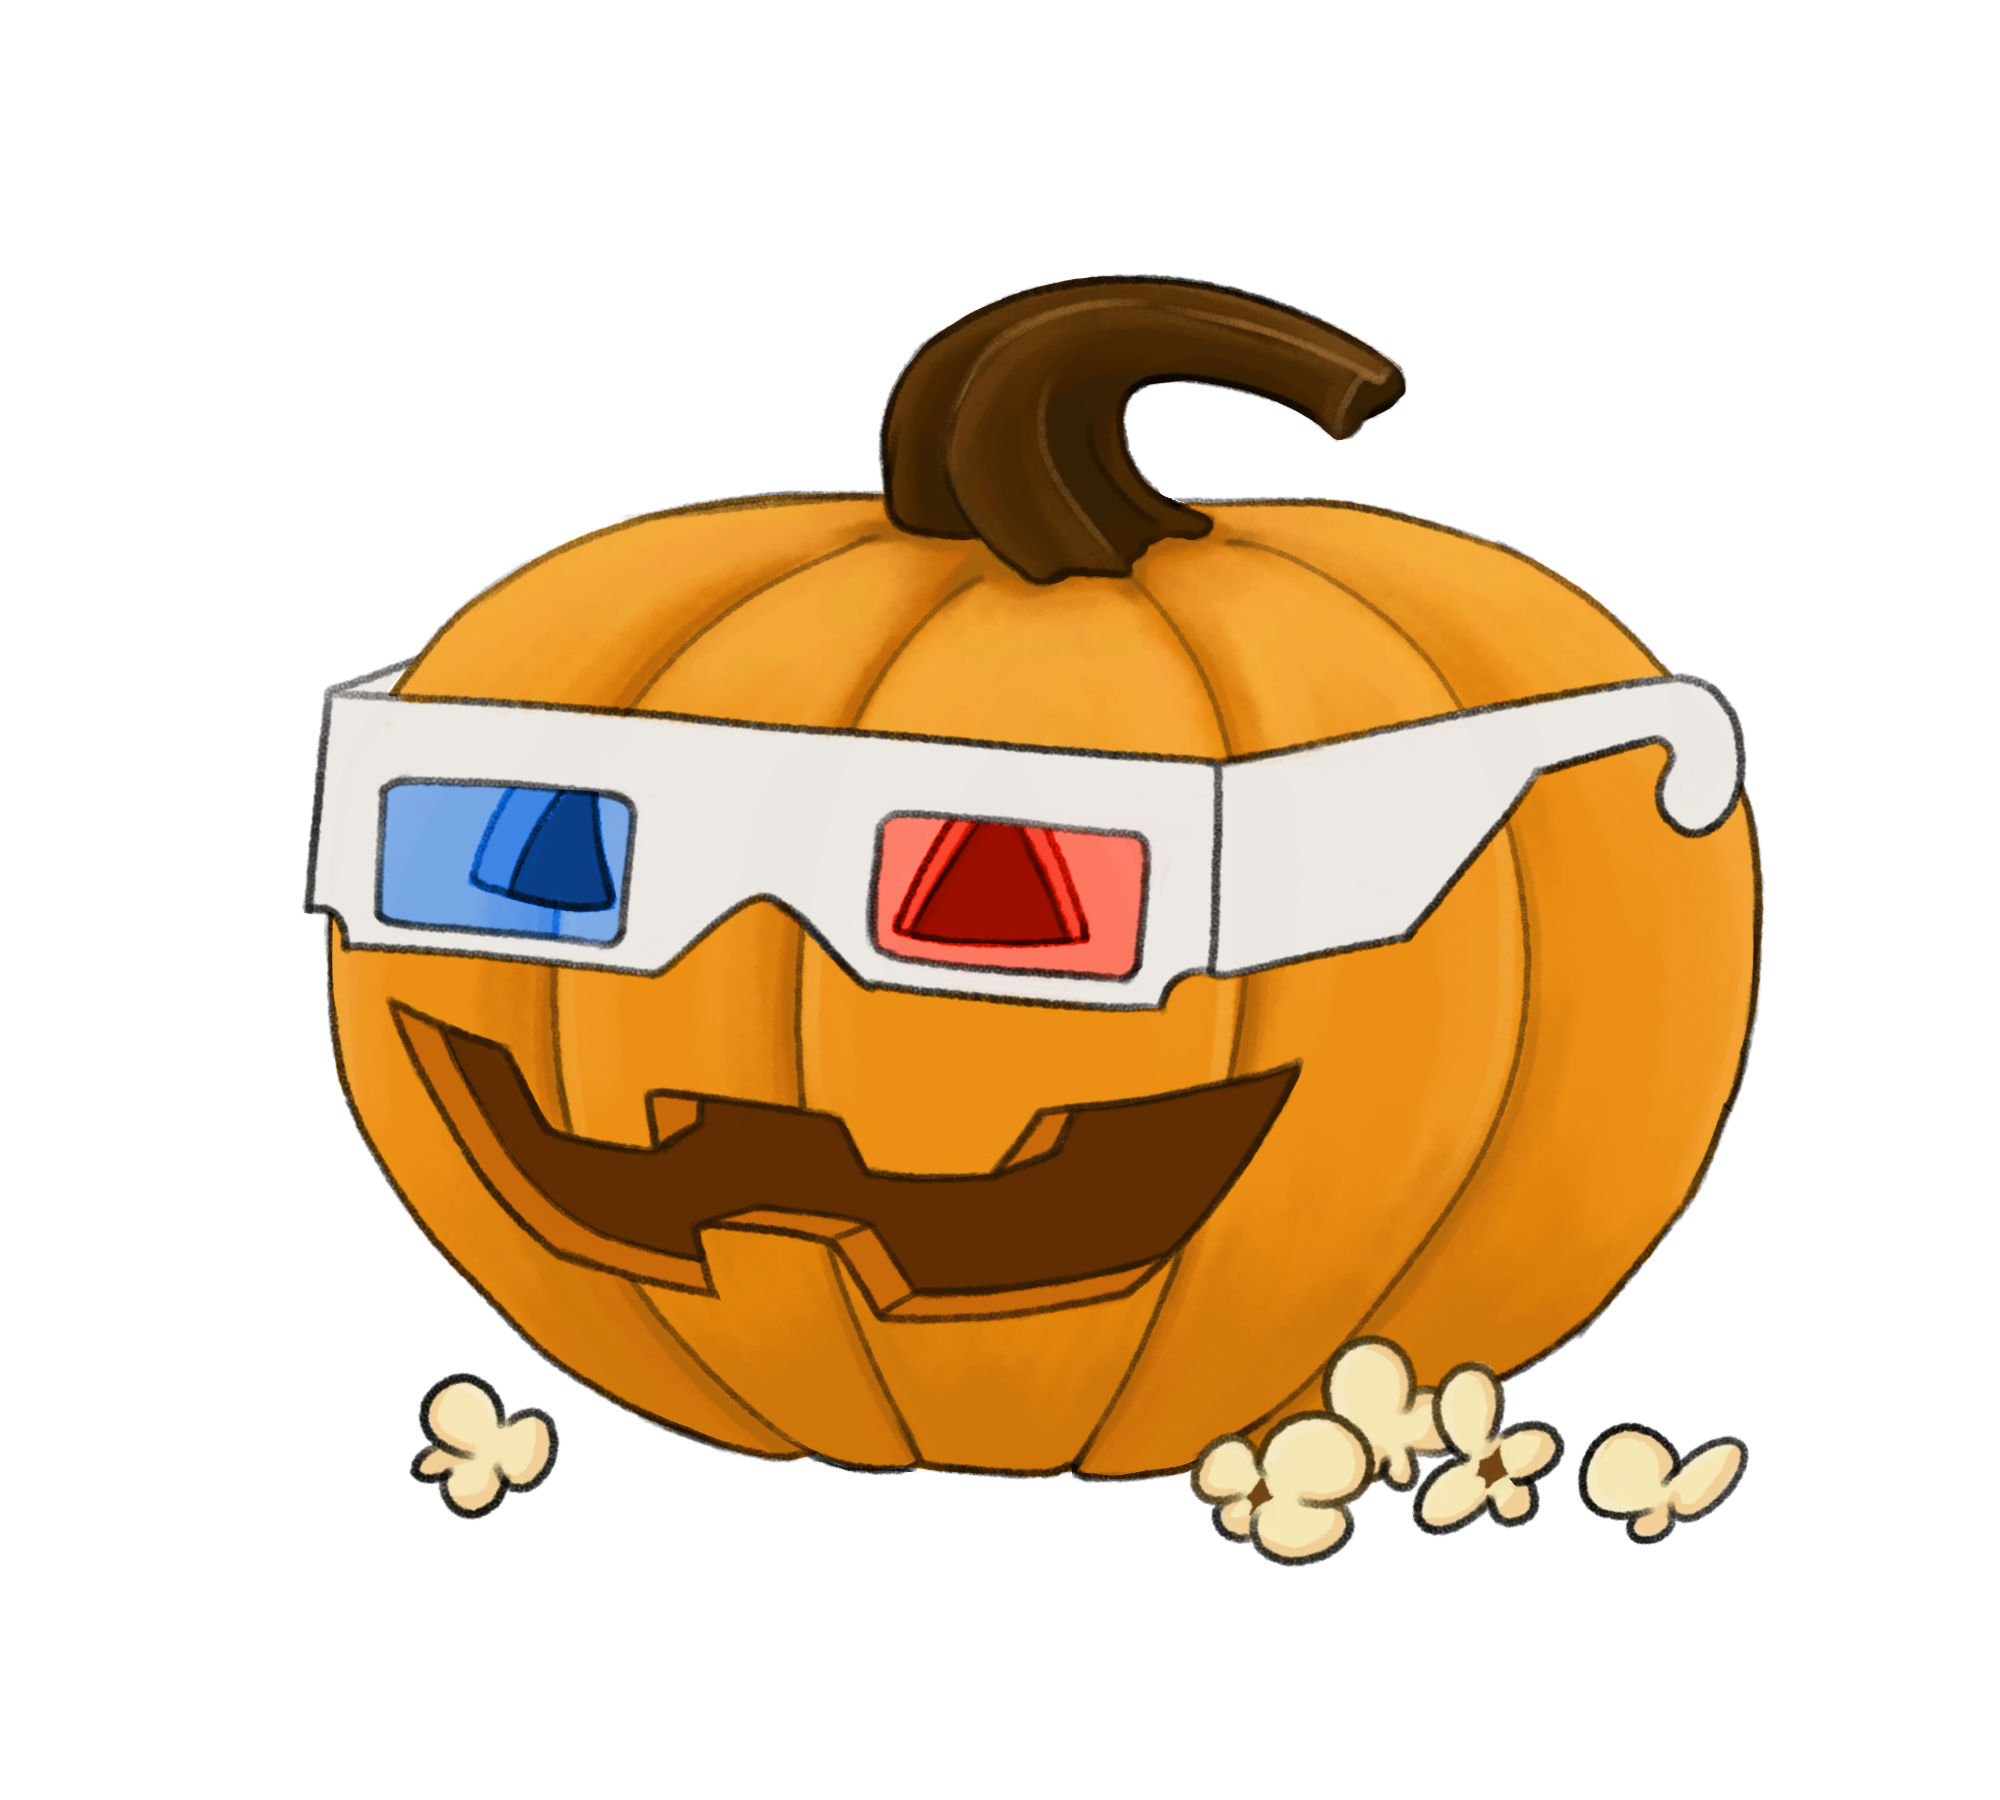 An illustration of a pumpkin wearing 3D glasses smiling.